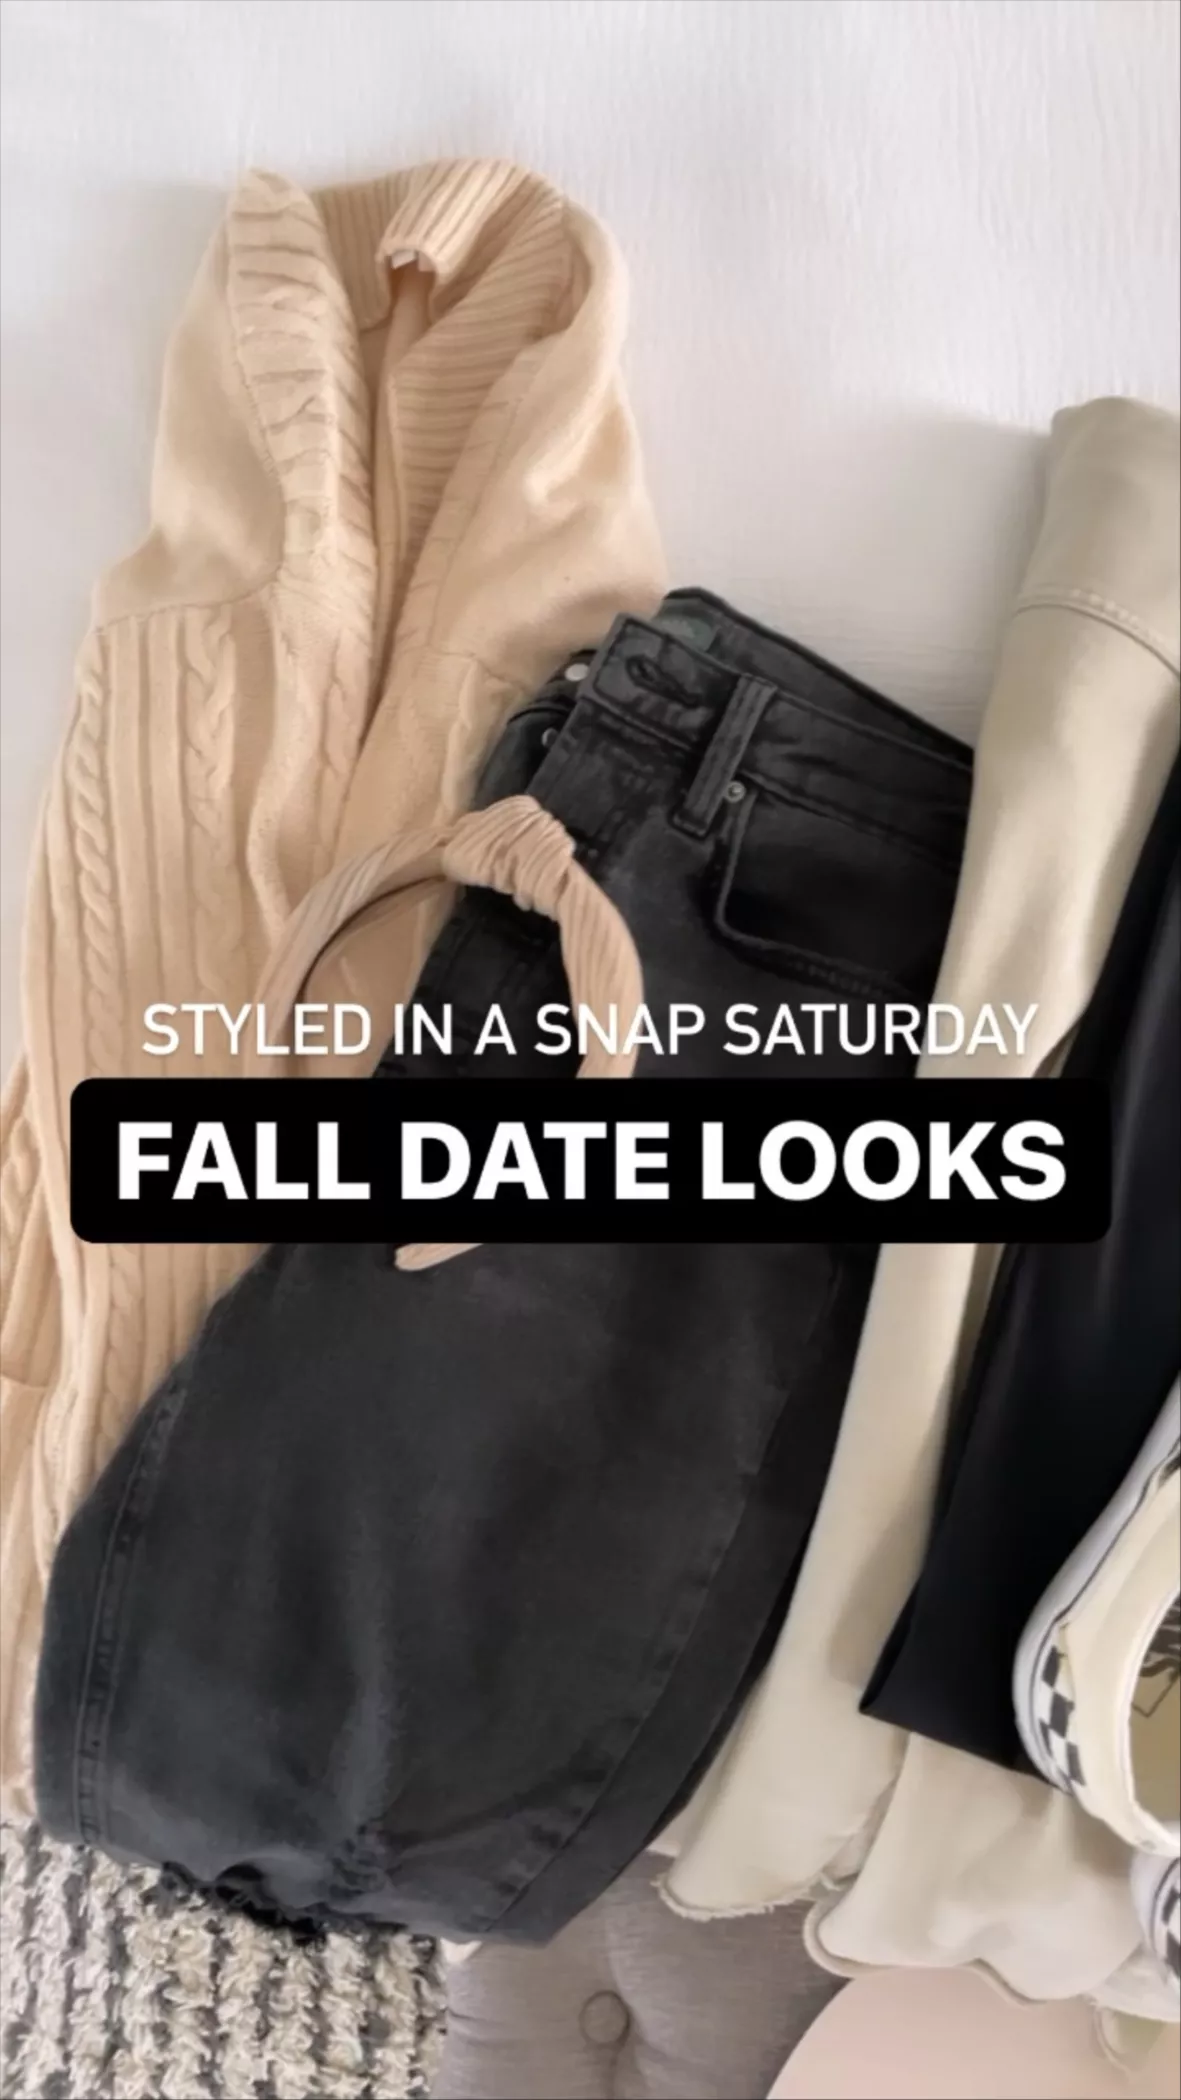 Dating Clothes by snaps